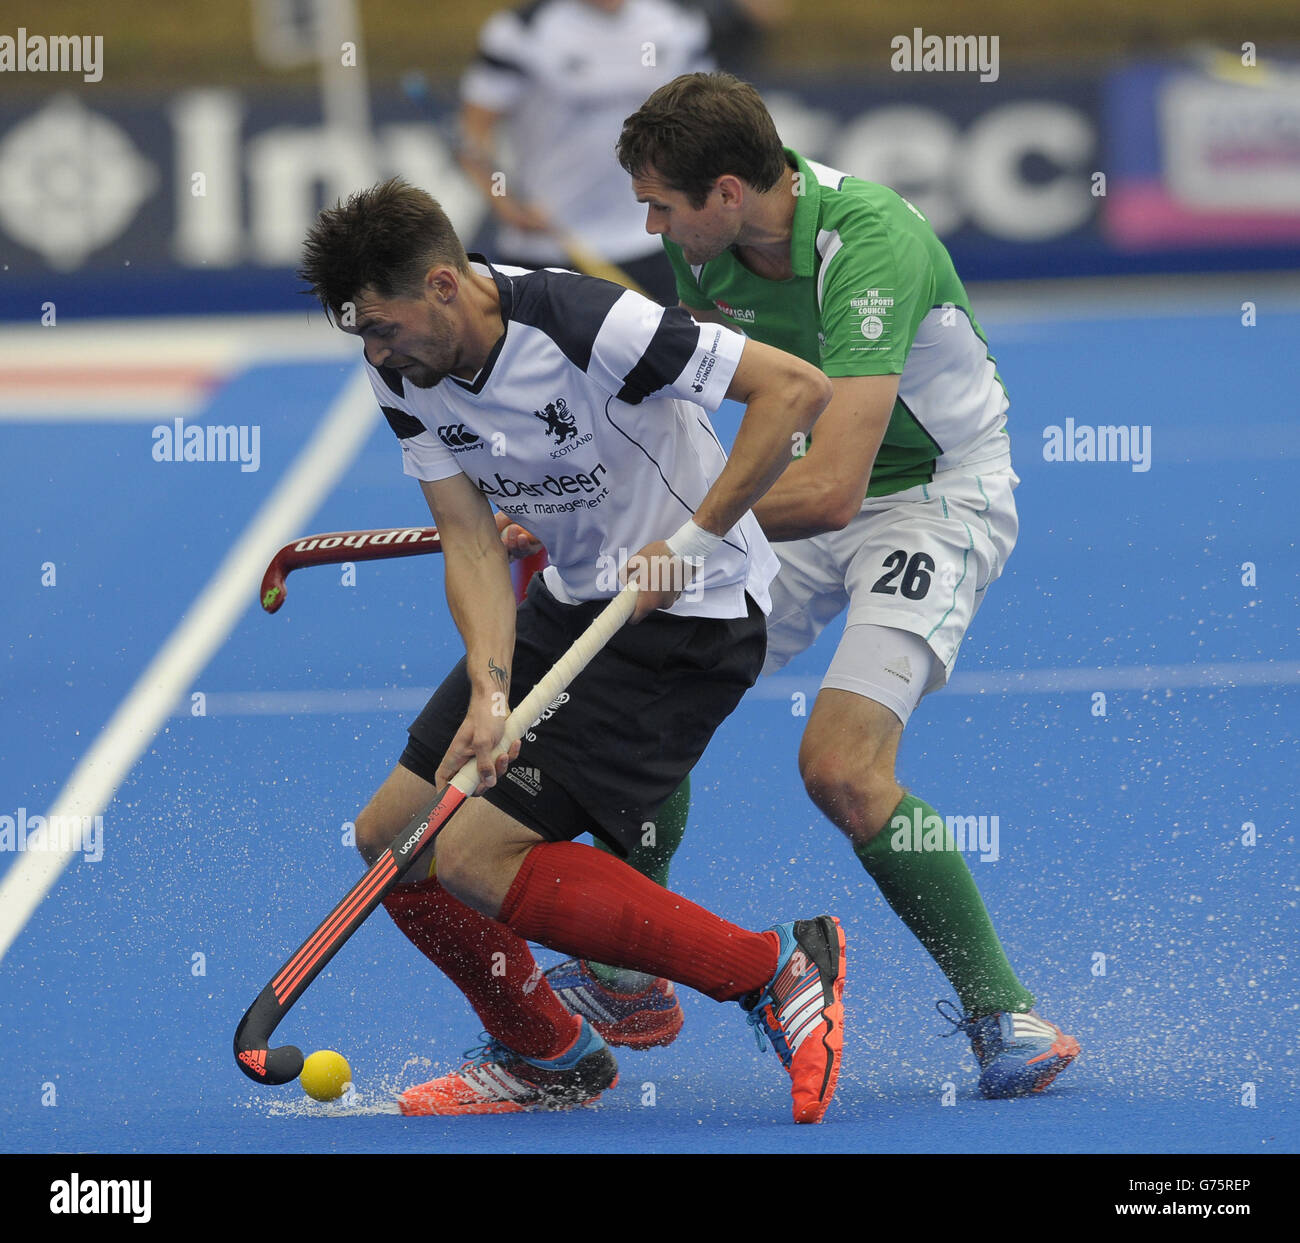 Scotland's Kenny Bain is challenged by Ireland's Paul Gleghorne during the Investec London Cup match at The Lee Valley Hockey and Tennis Centre, London. Stock Photo